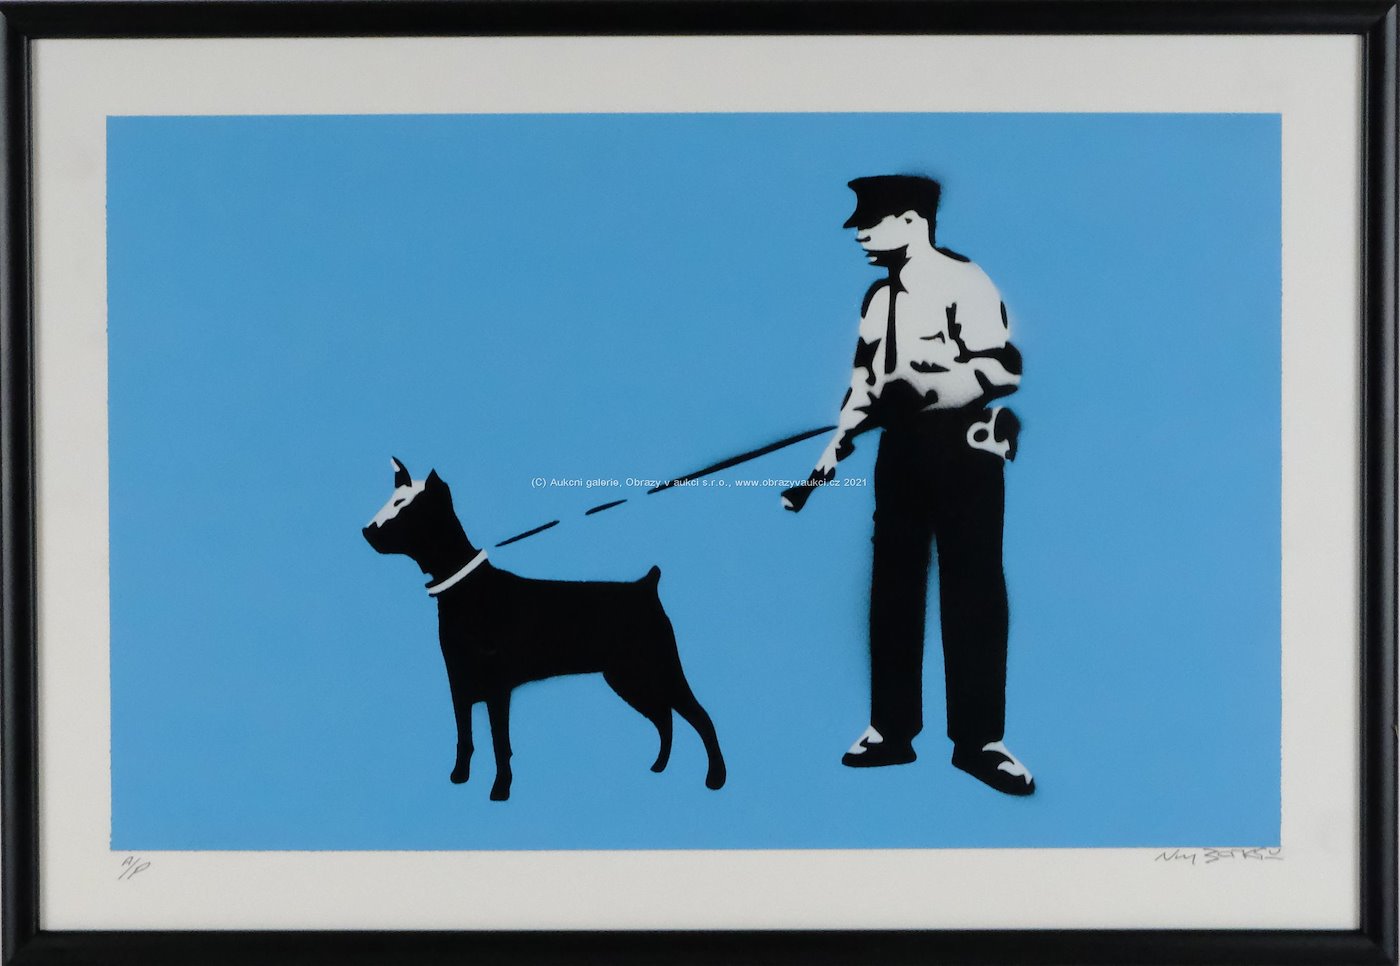 Not Banksy - Guard with Dog